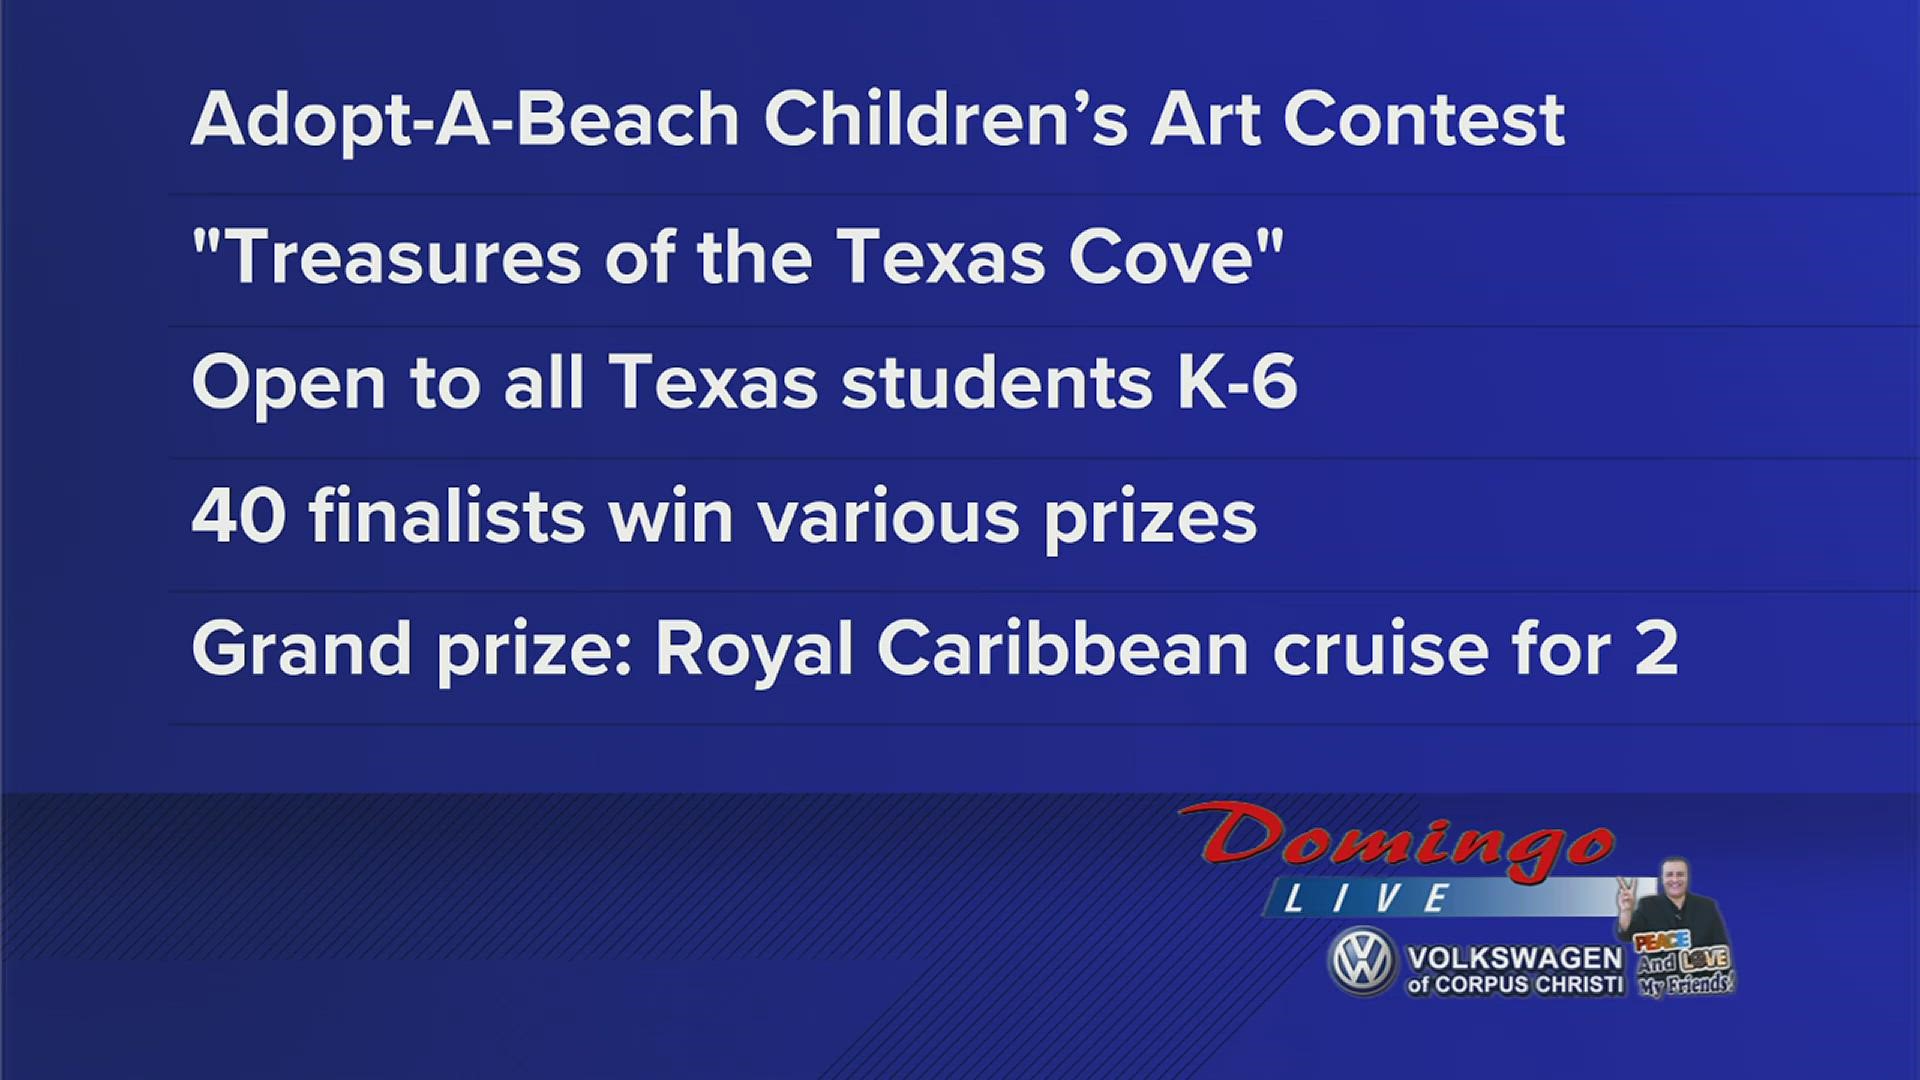 Entries are now open for the 27th Annual "Treasures of the Texas Coast" Children's Art Contest. All Texas students K-6 are eligible to enter.